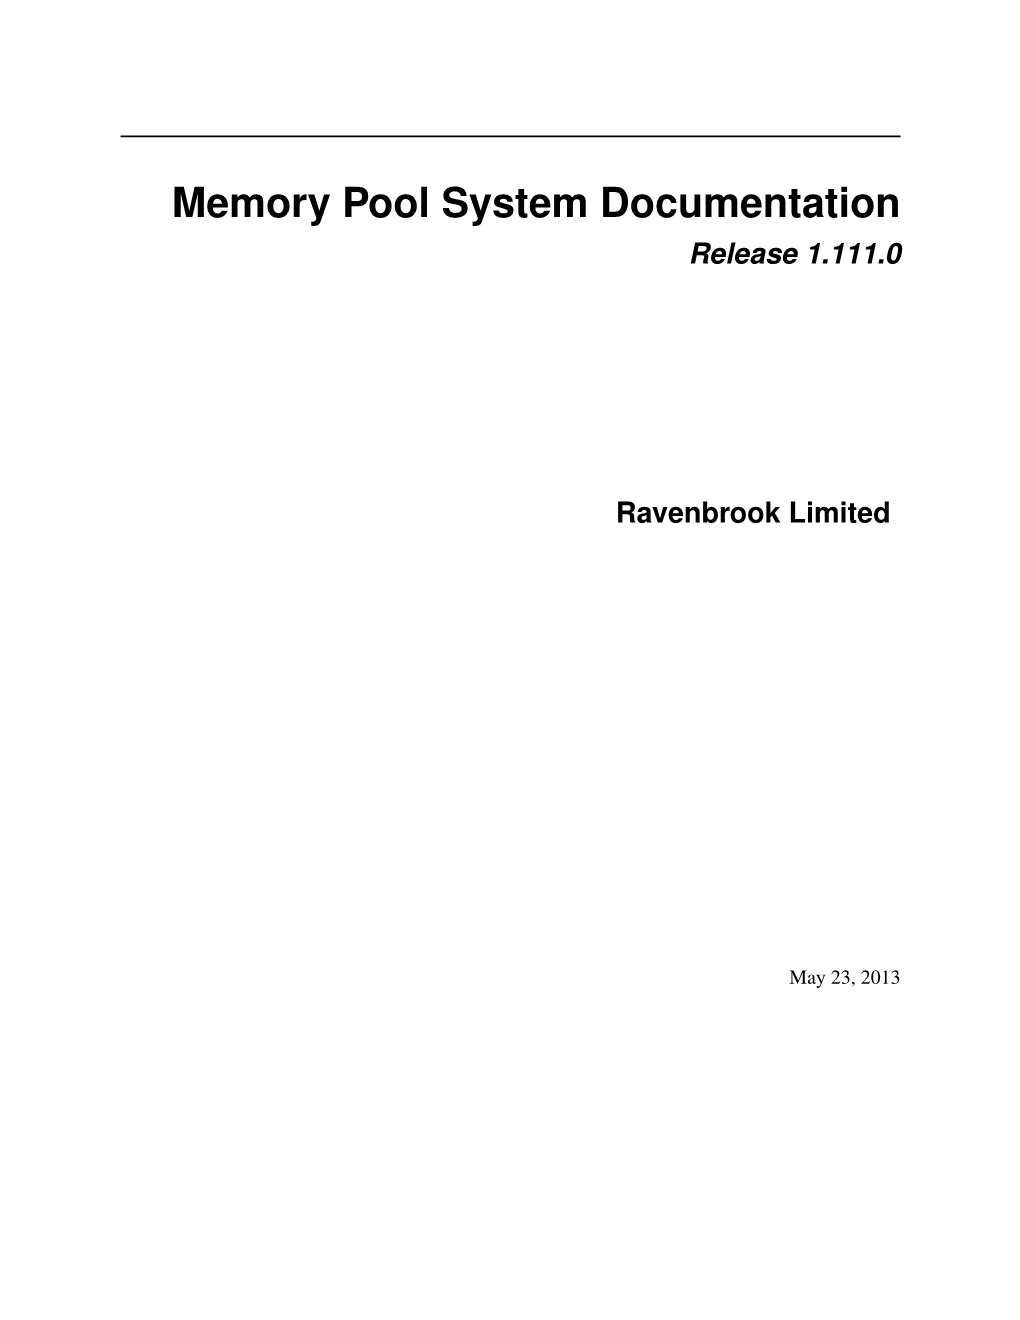 Memory Pool System Documentation Release 1.111.0